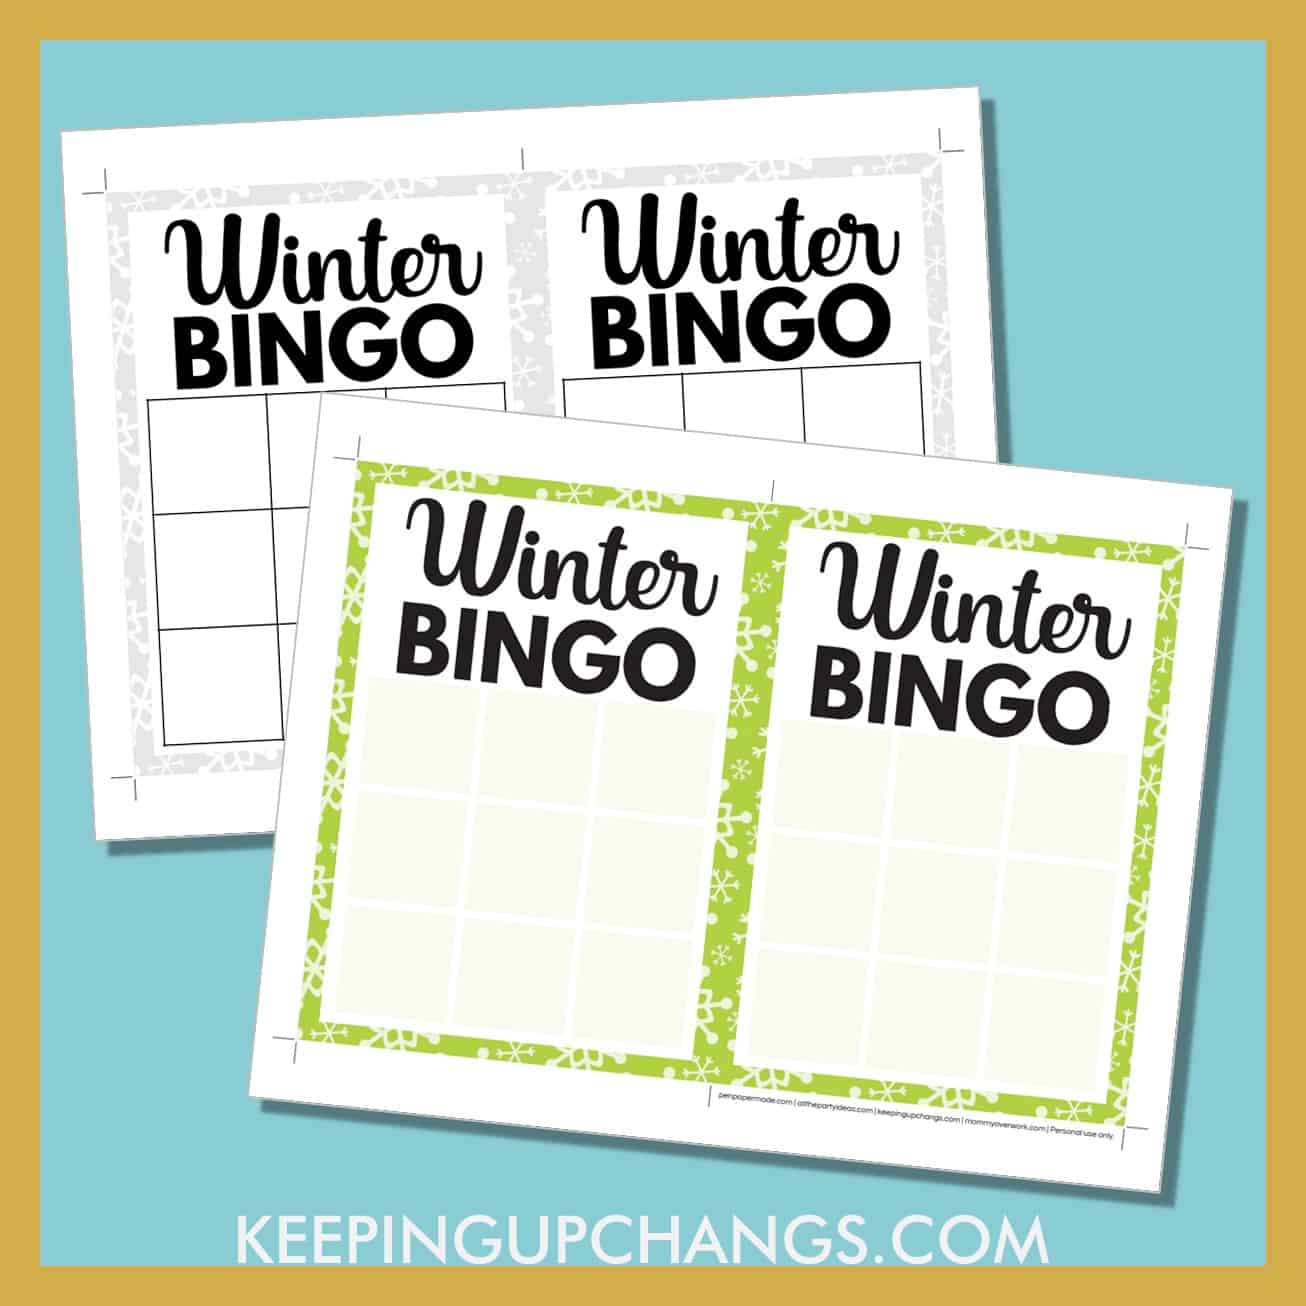 free winter bingo 3x3 grid game board blank template in color, black and white.